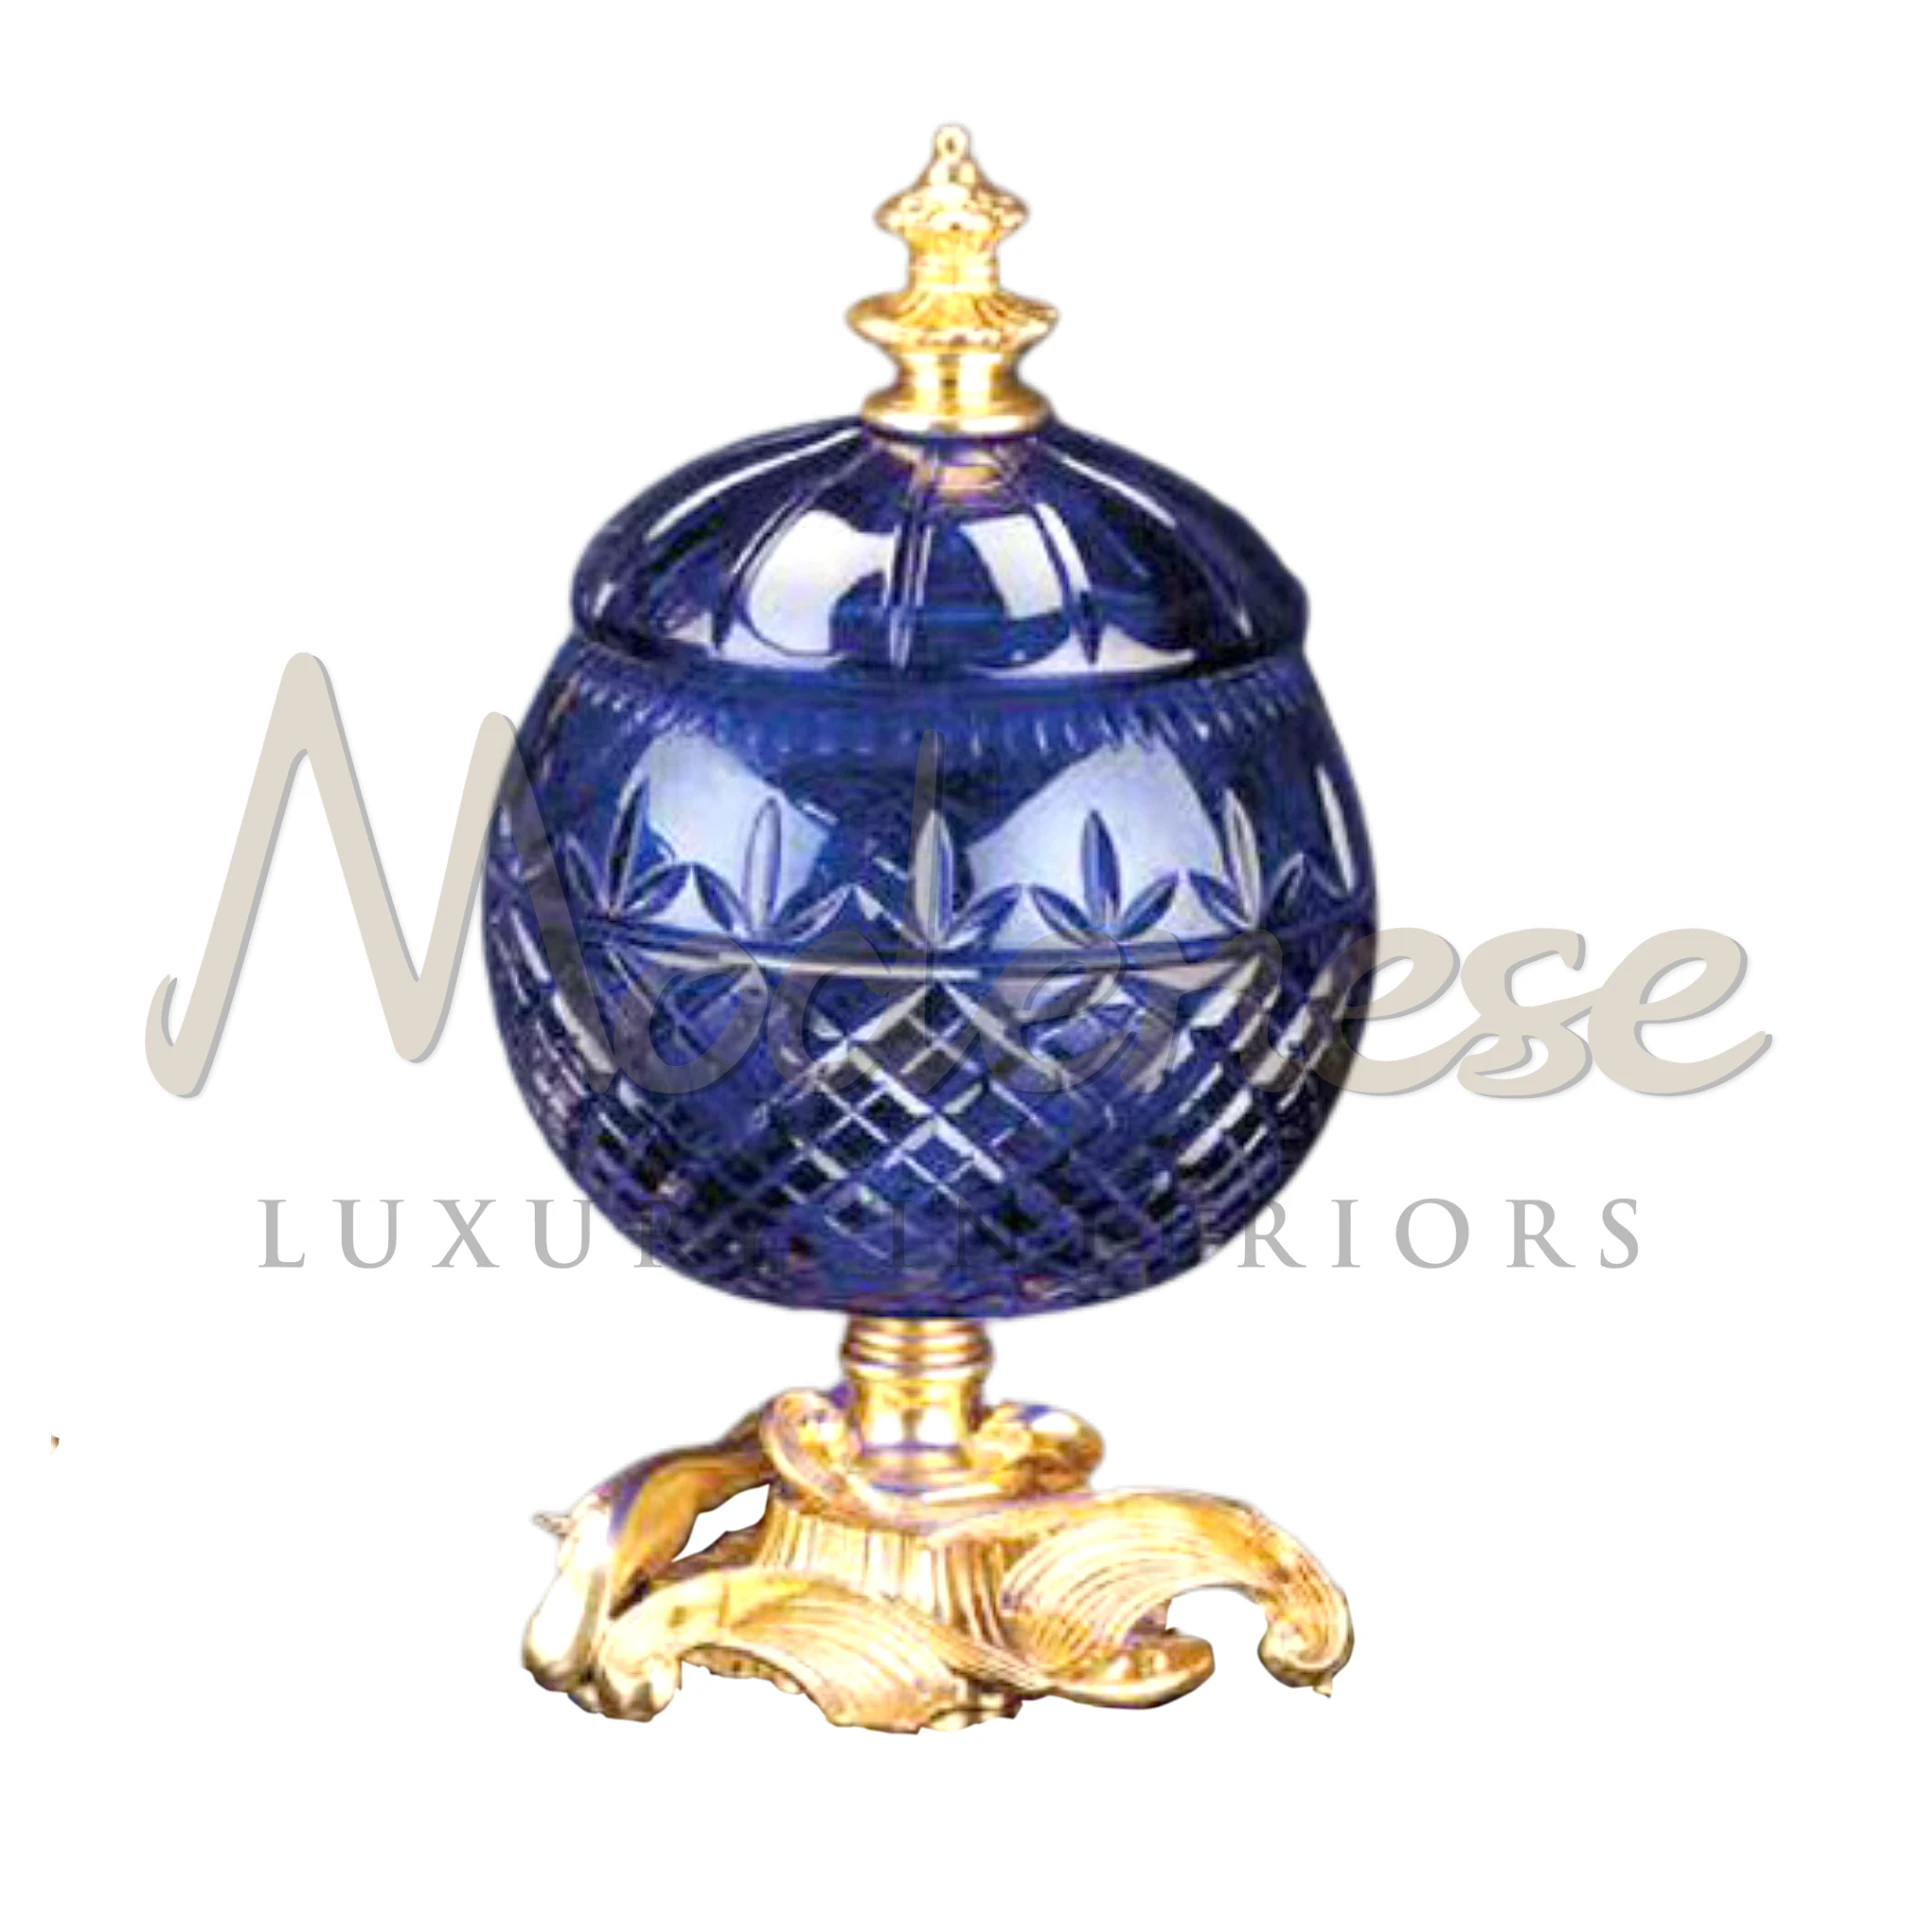 Victorian Royal Blue Glass Box, a symbol of elegance and history, perfect for adding a touch of Victorian grandeur to luxury interiors, whether for storage or display.






